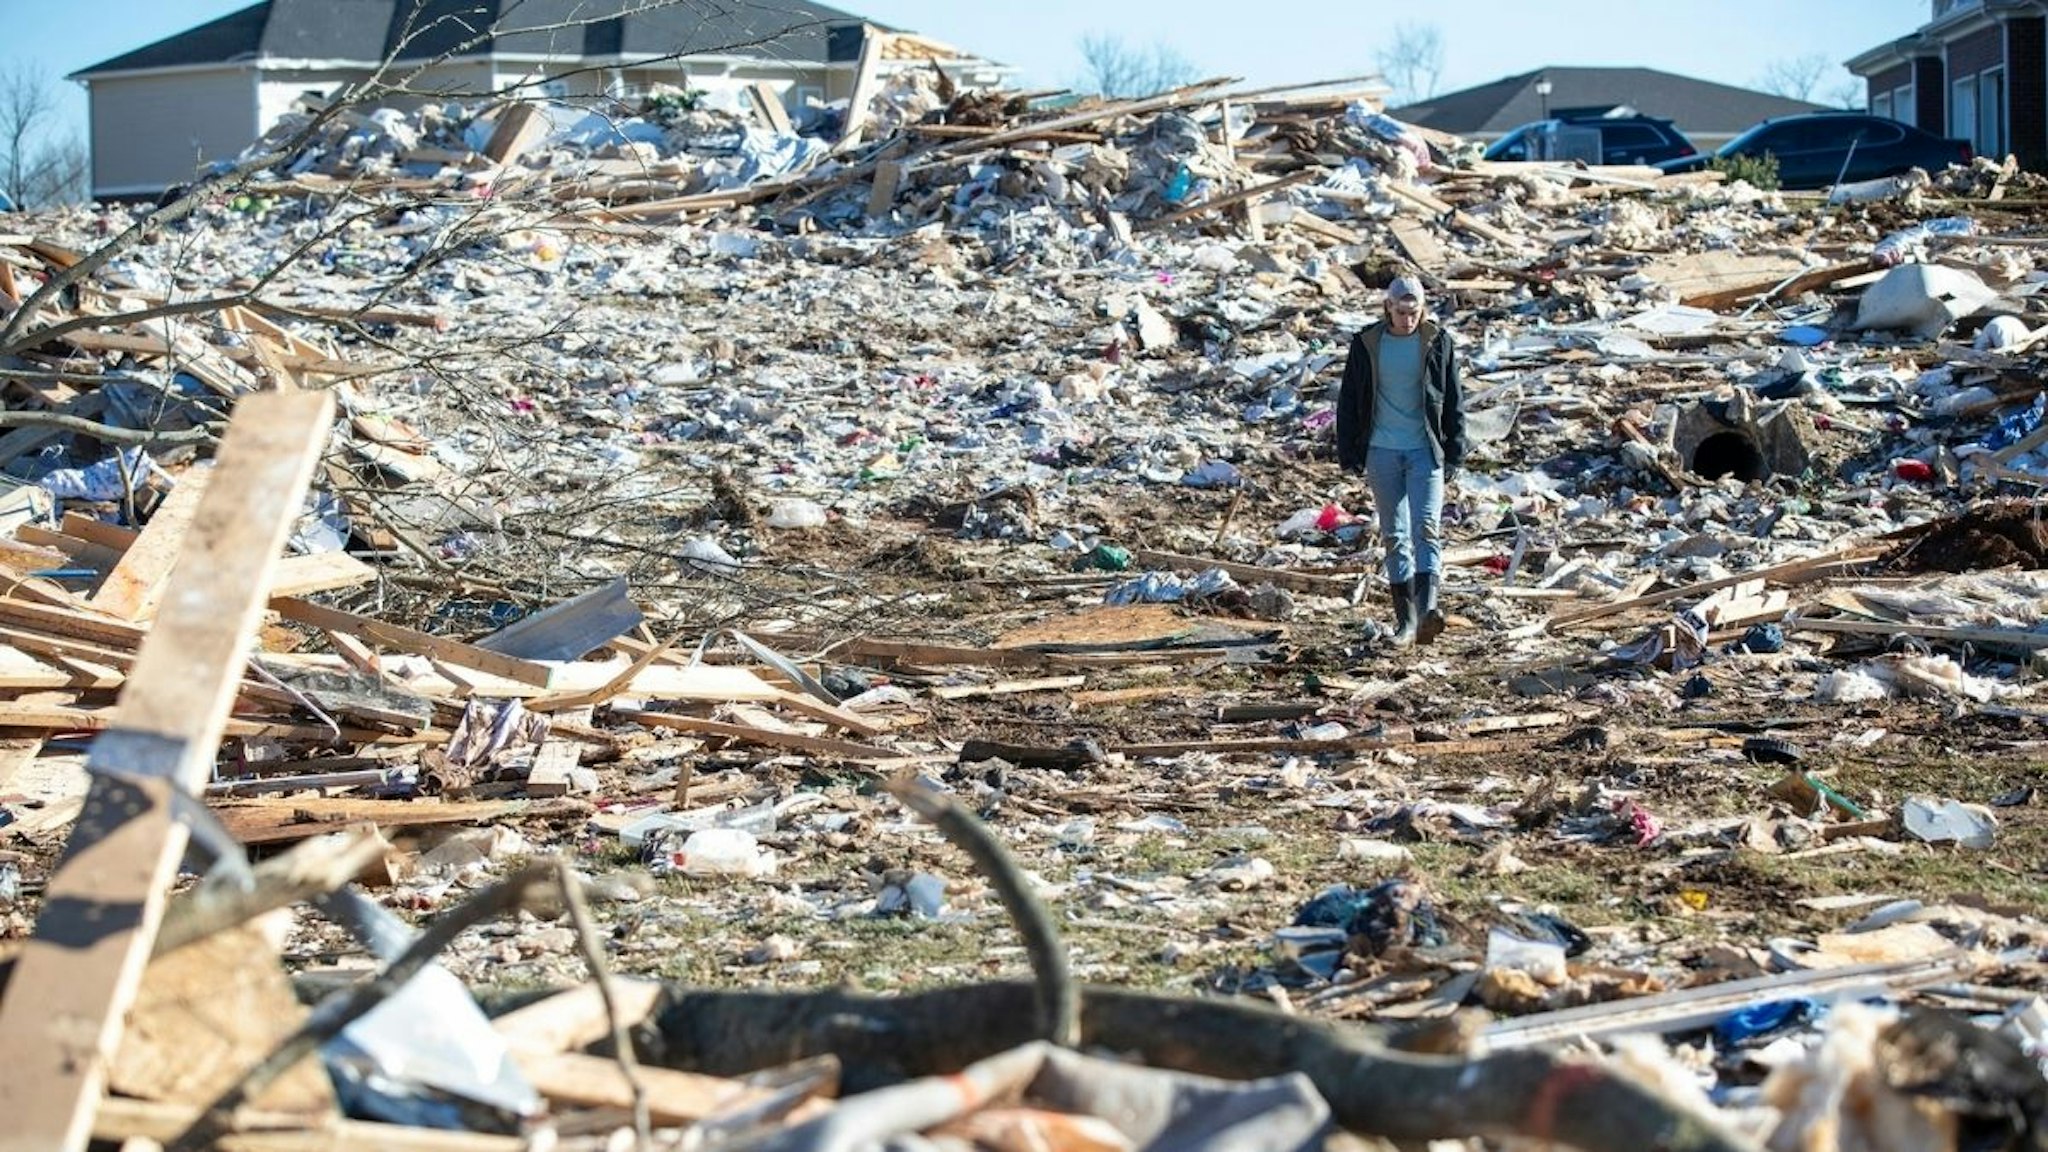 A man walks through the wrecked remains of houses in a neighborhood off Russellville Road after a tornado swept through Friday night in Bowling Green, Ky., Sunday, Dec. 12, 2021.